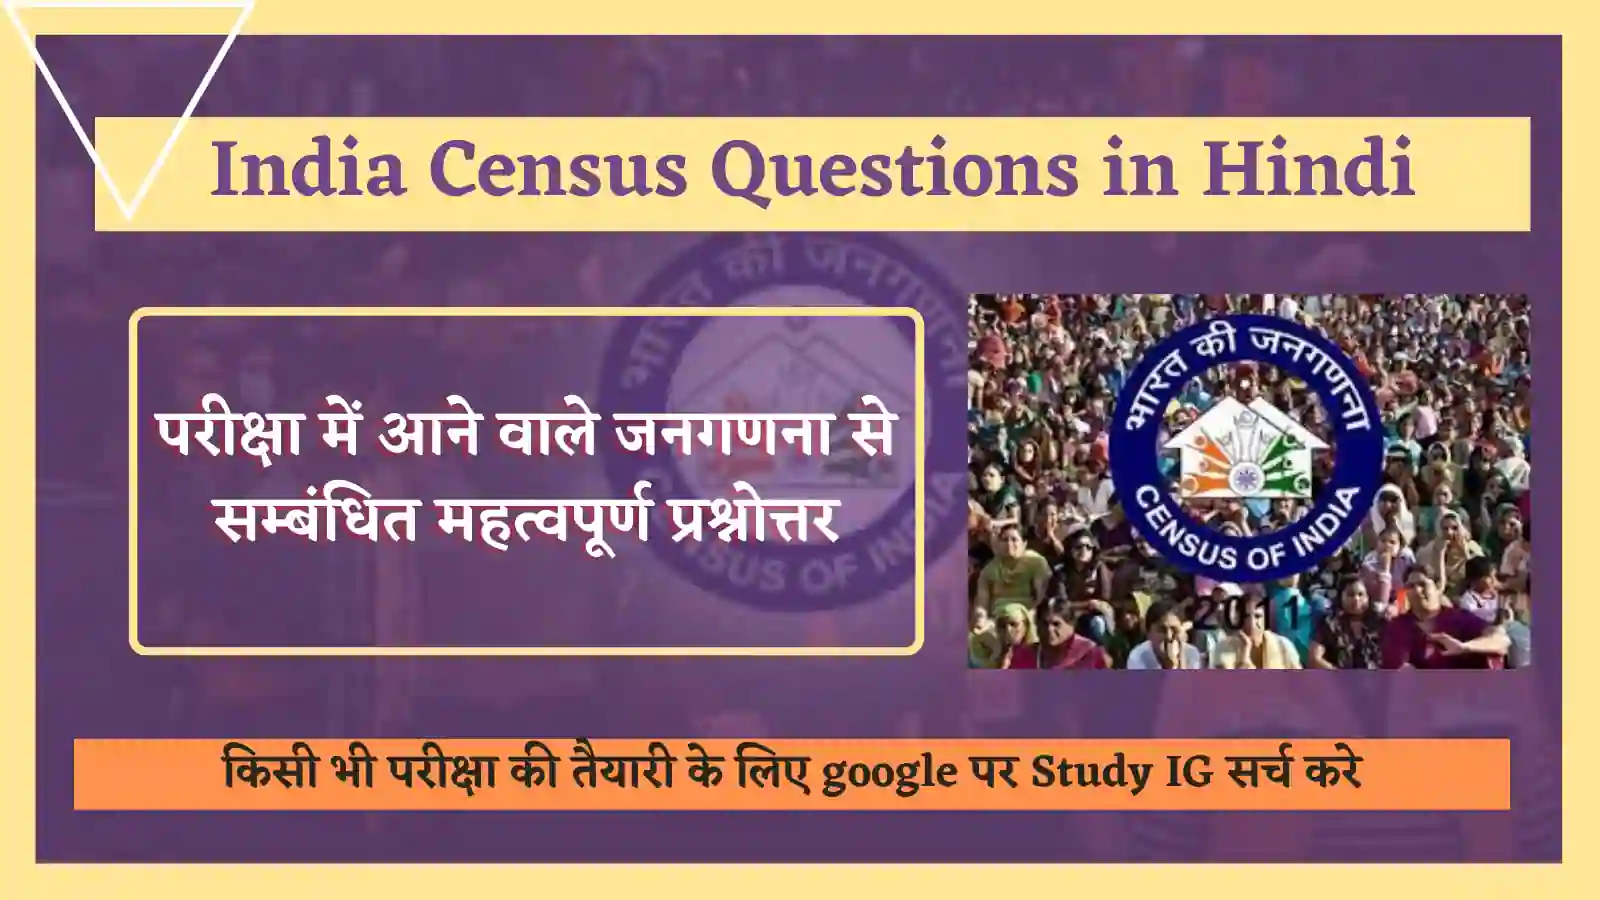 India Census Questions in Hindi